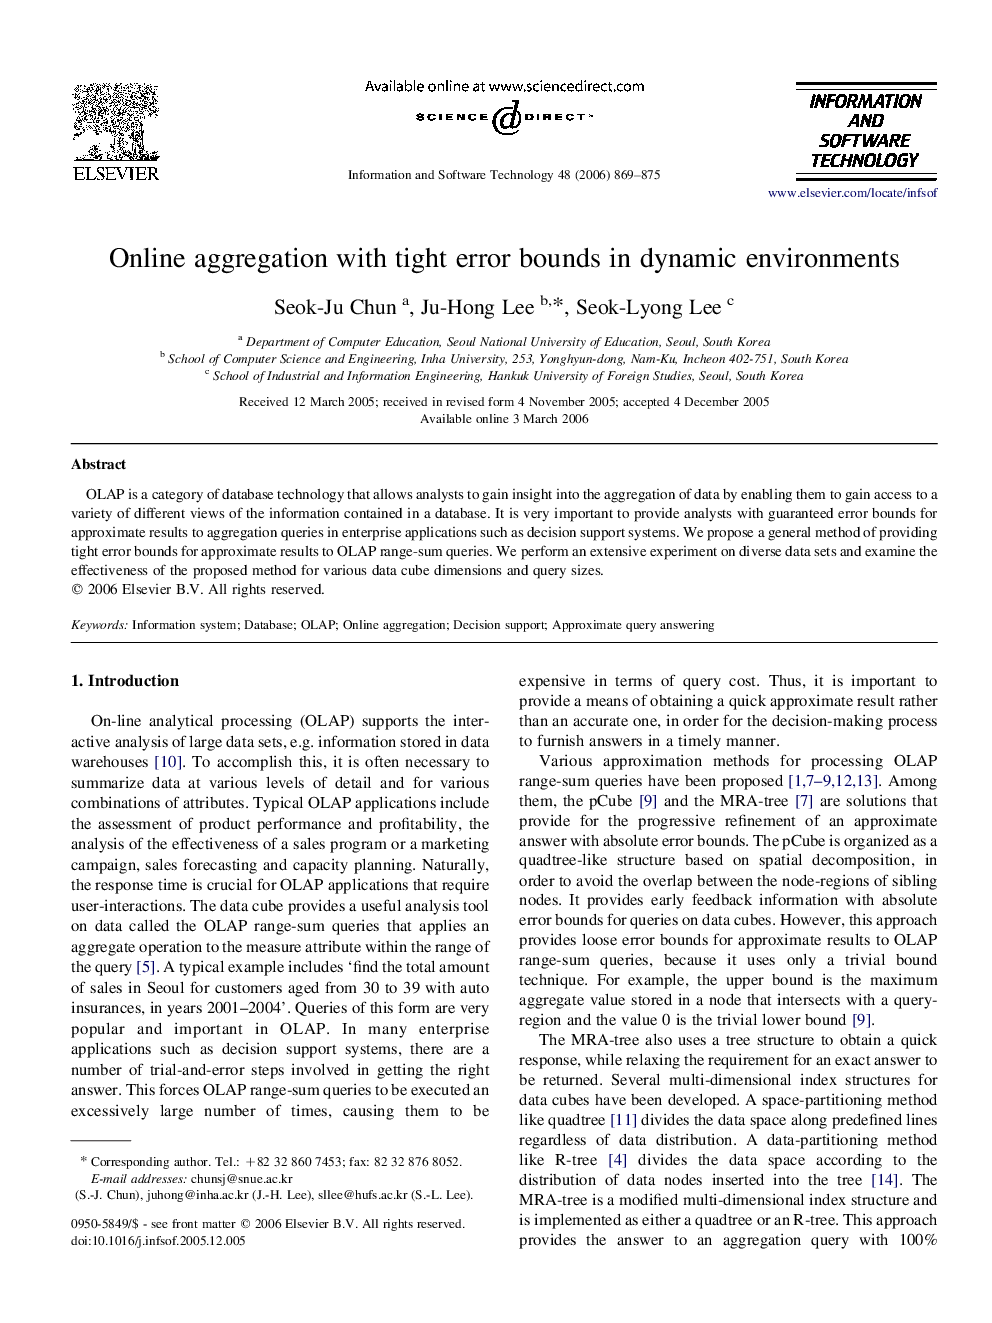 Online aggregation with tight error bounds in dynamic environments